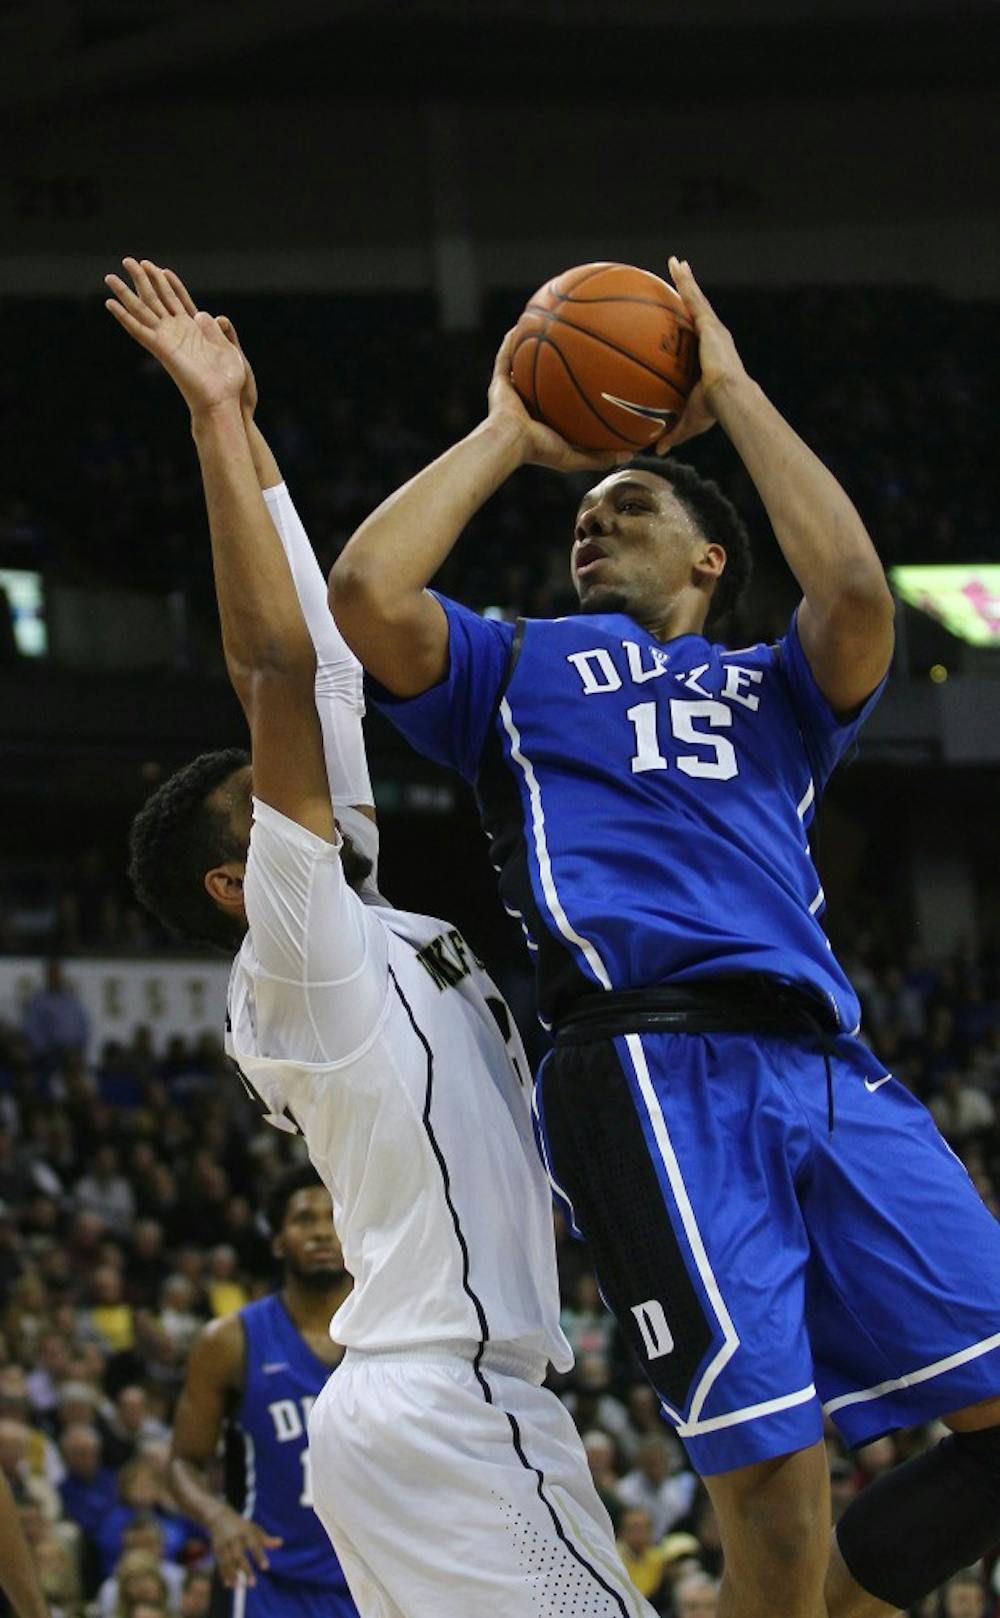 Freshman Jahlil Okafor was held in check against Wake Forest but will look for another big game against N.C. State Sunday.